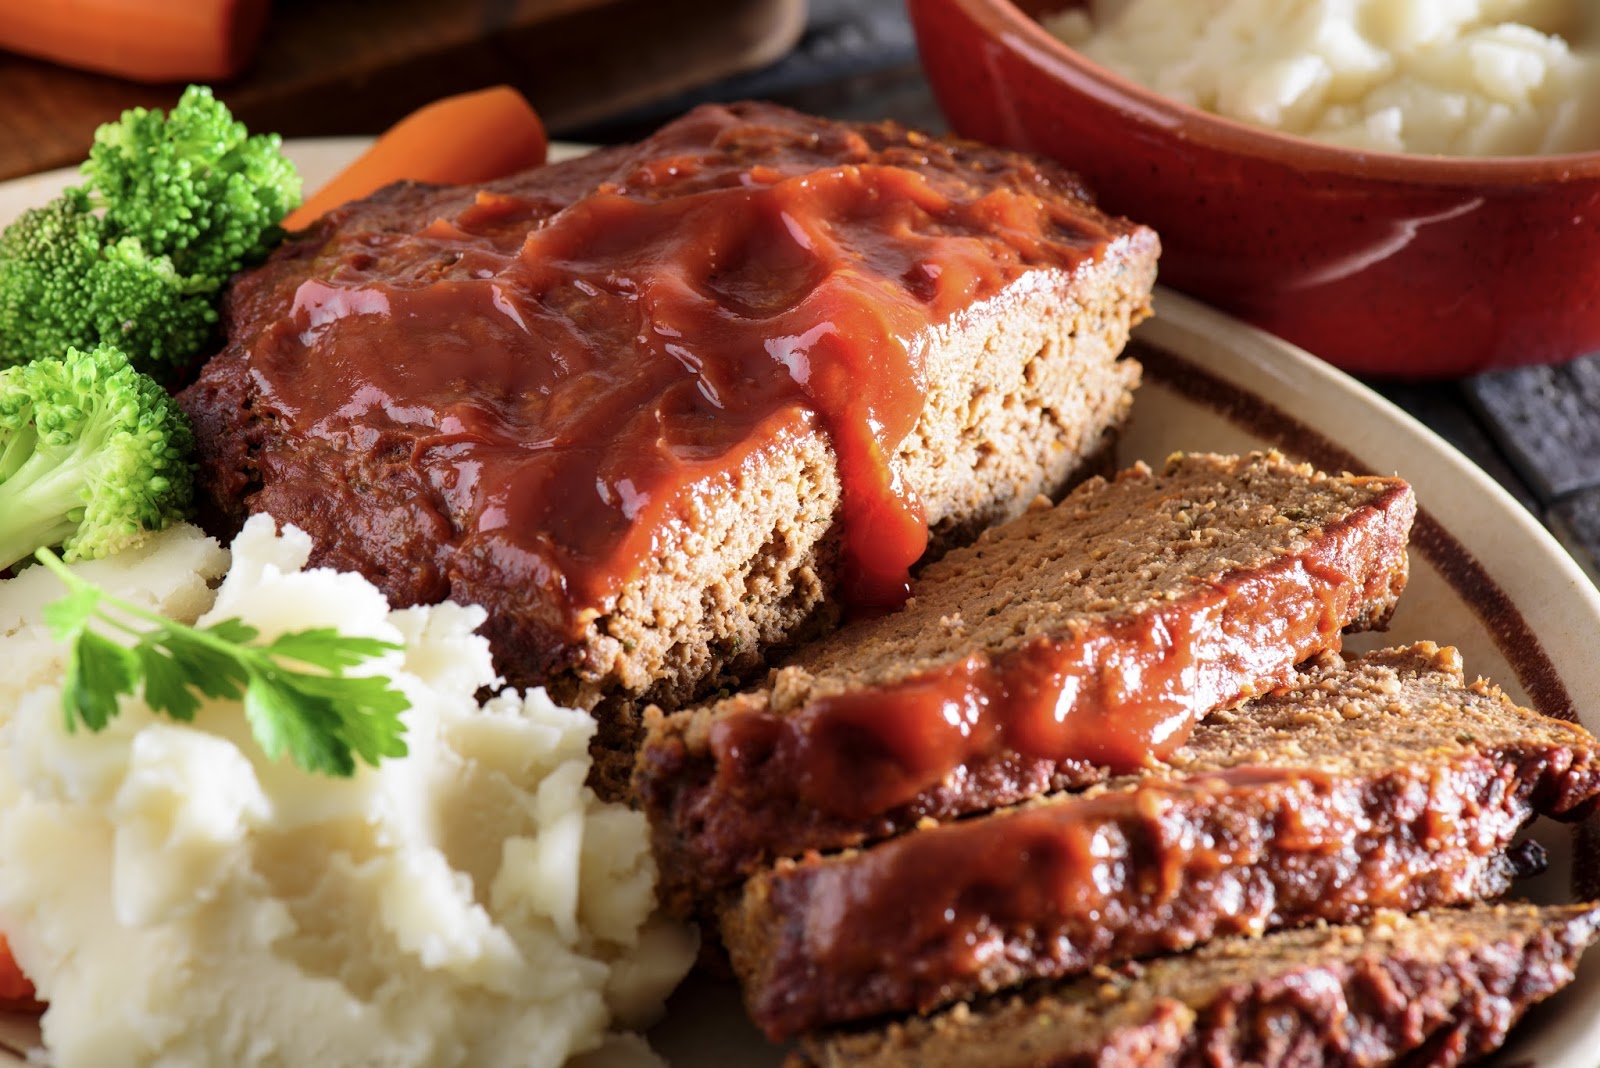 A 4 Pound Meatloaf At 200 How Long Can To Cook : Momma's Best Meatloaf - The Country ...